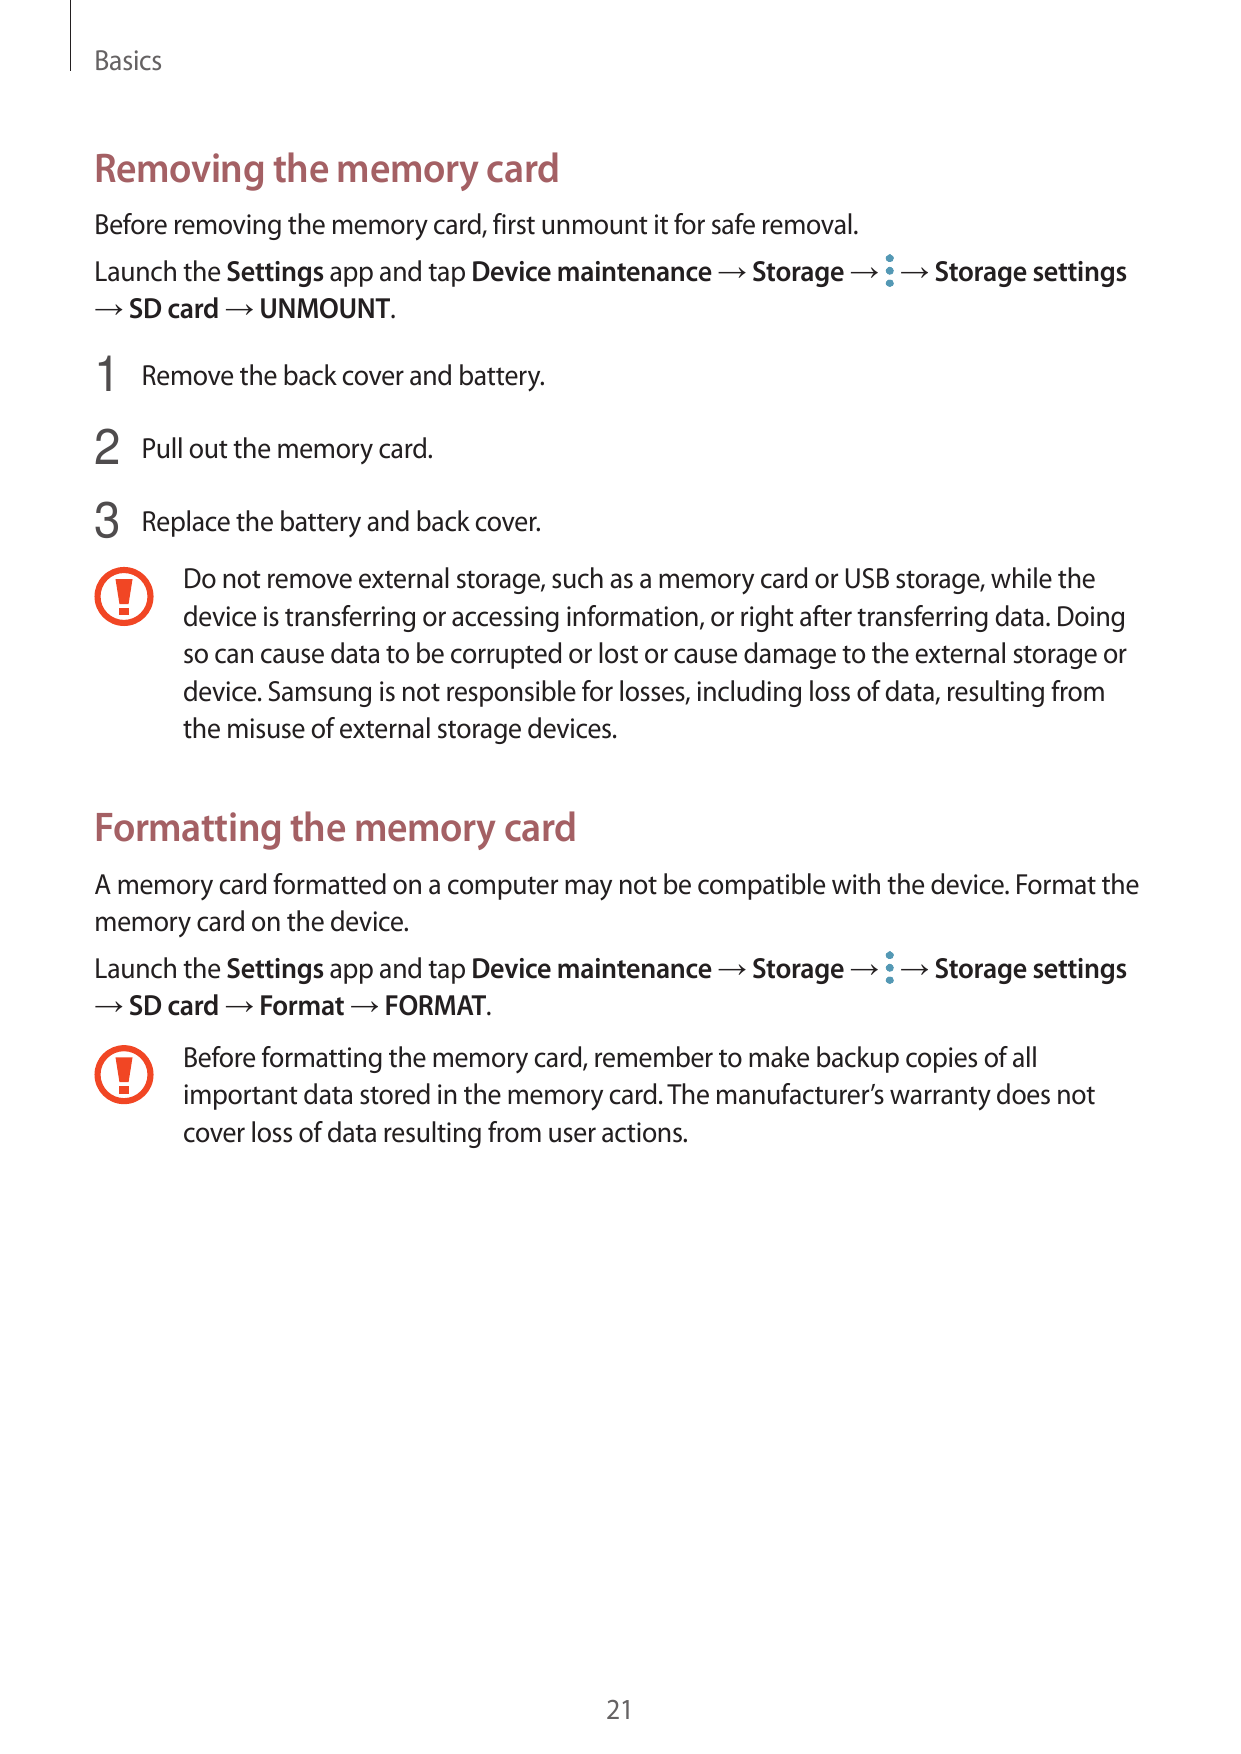 BasicsRemoving the memory cardBefore removing the memory card, first unmount it for safe removal.Launch the Settings app and tap